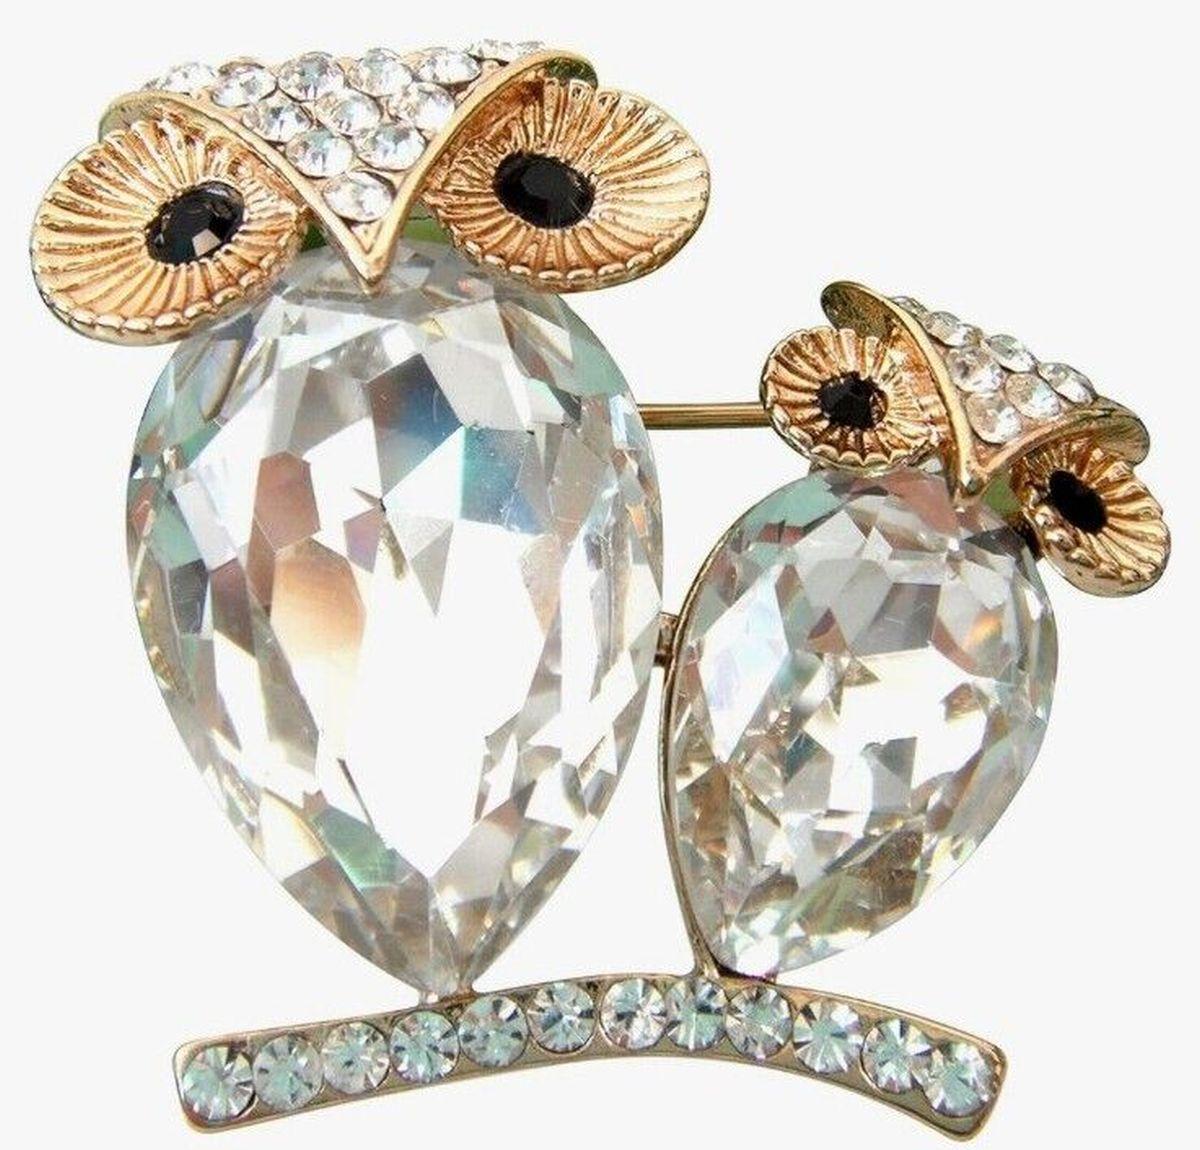 Simply Beautiful! A Delightful Vintage Statement 2 Owls Brooch featuring intricate details of 2 Owls with Hand set faceted Pear shaped Crystal Bodies and Sparkling Crystal accents. Dimensional Gold Tone mounting. Measuring approx. 1.25” high. More